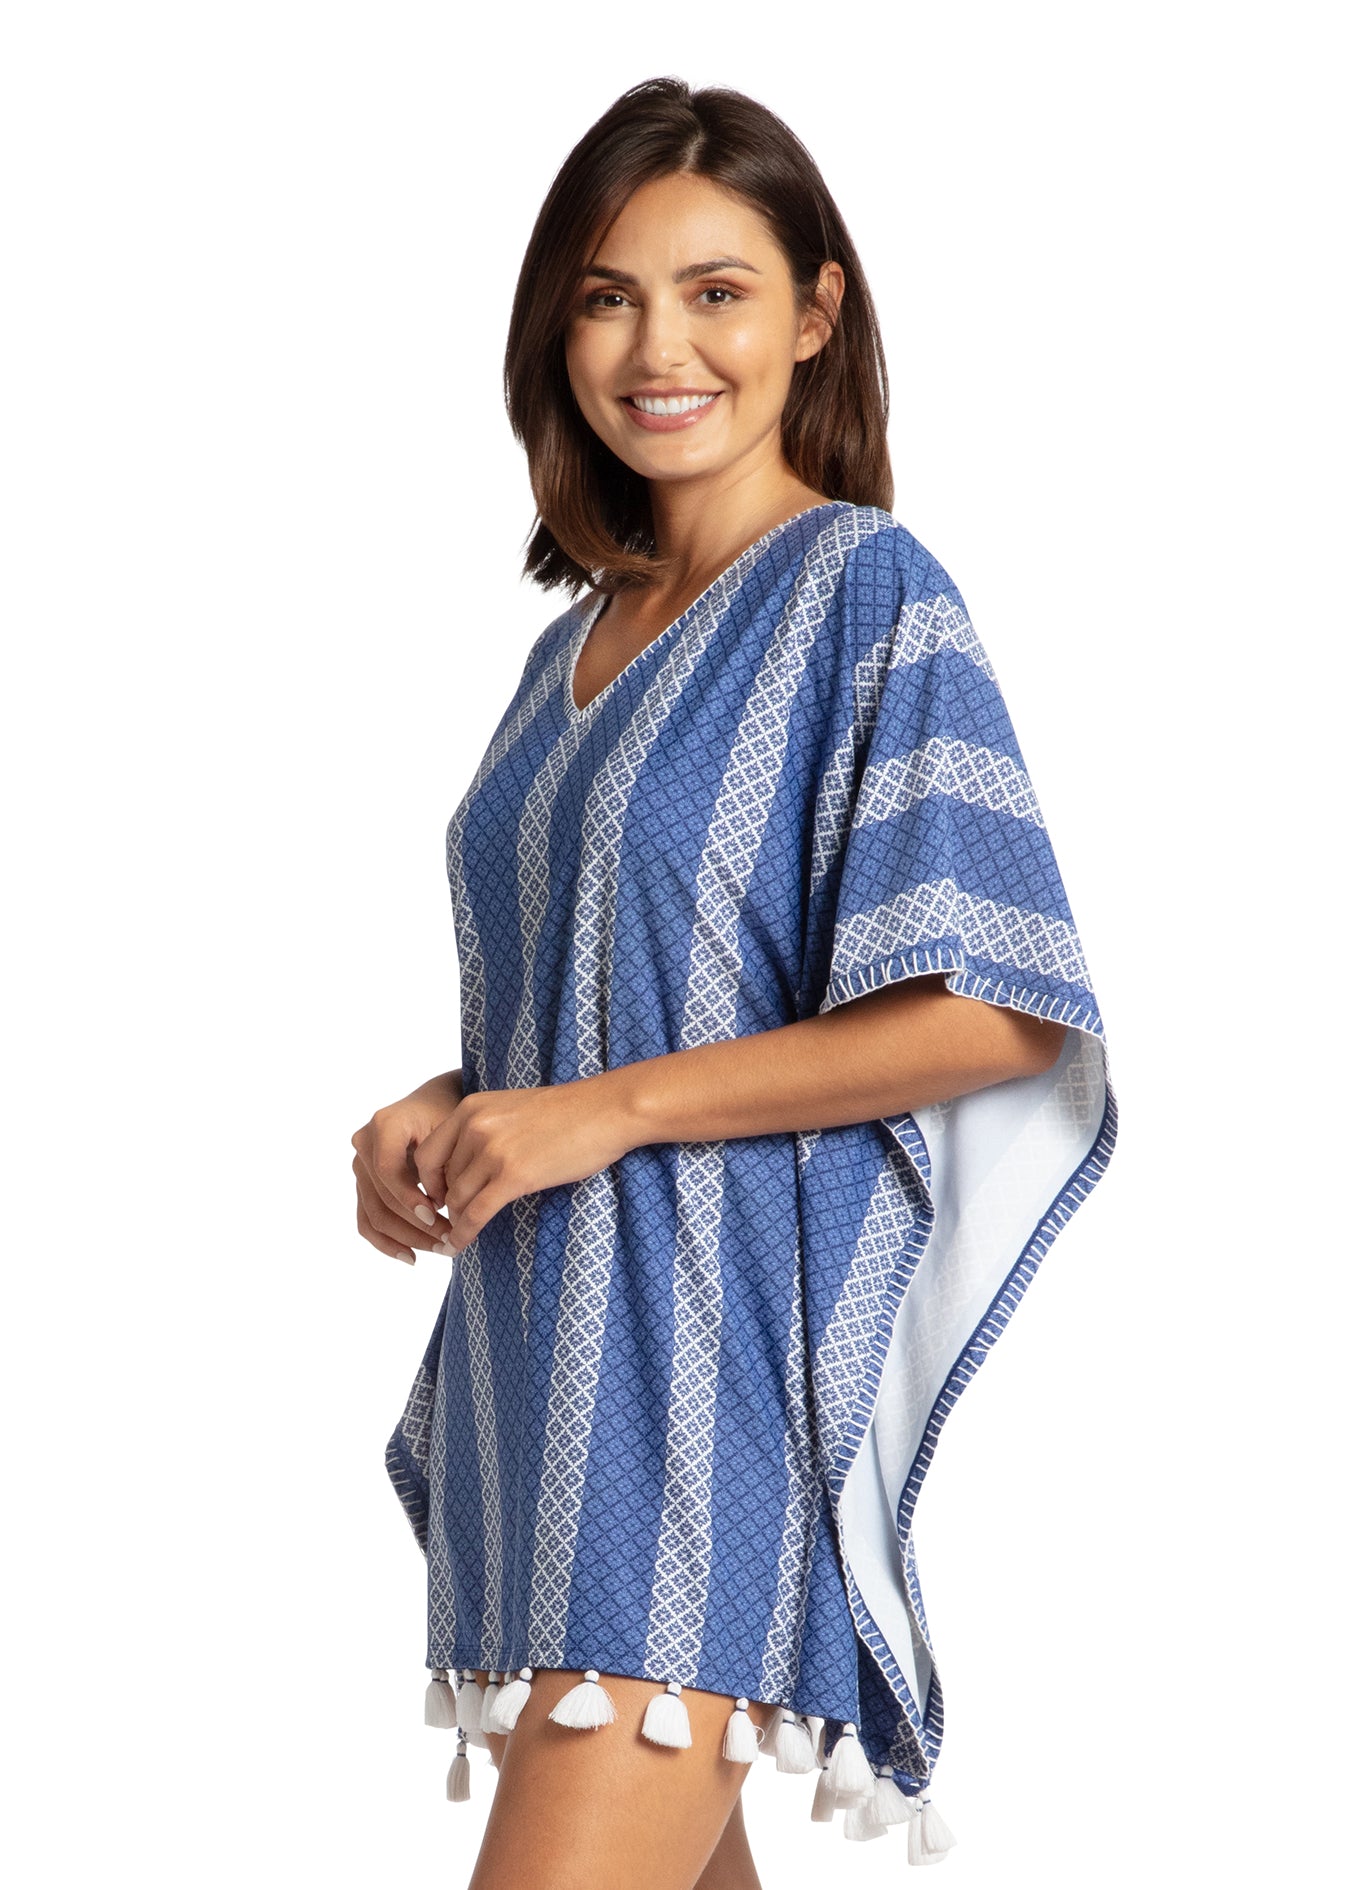 Woman modeling sideof Fisher Island Embroidered Cover Up.